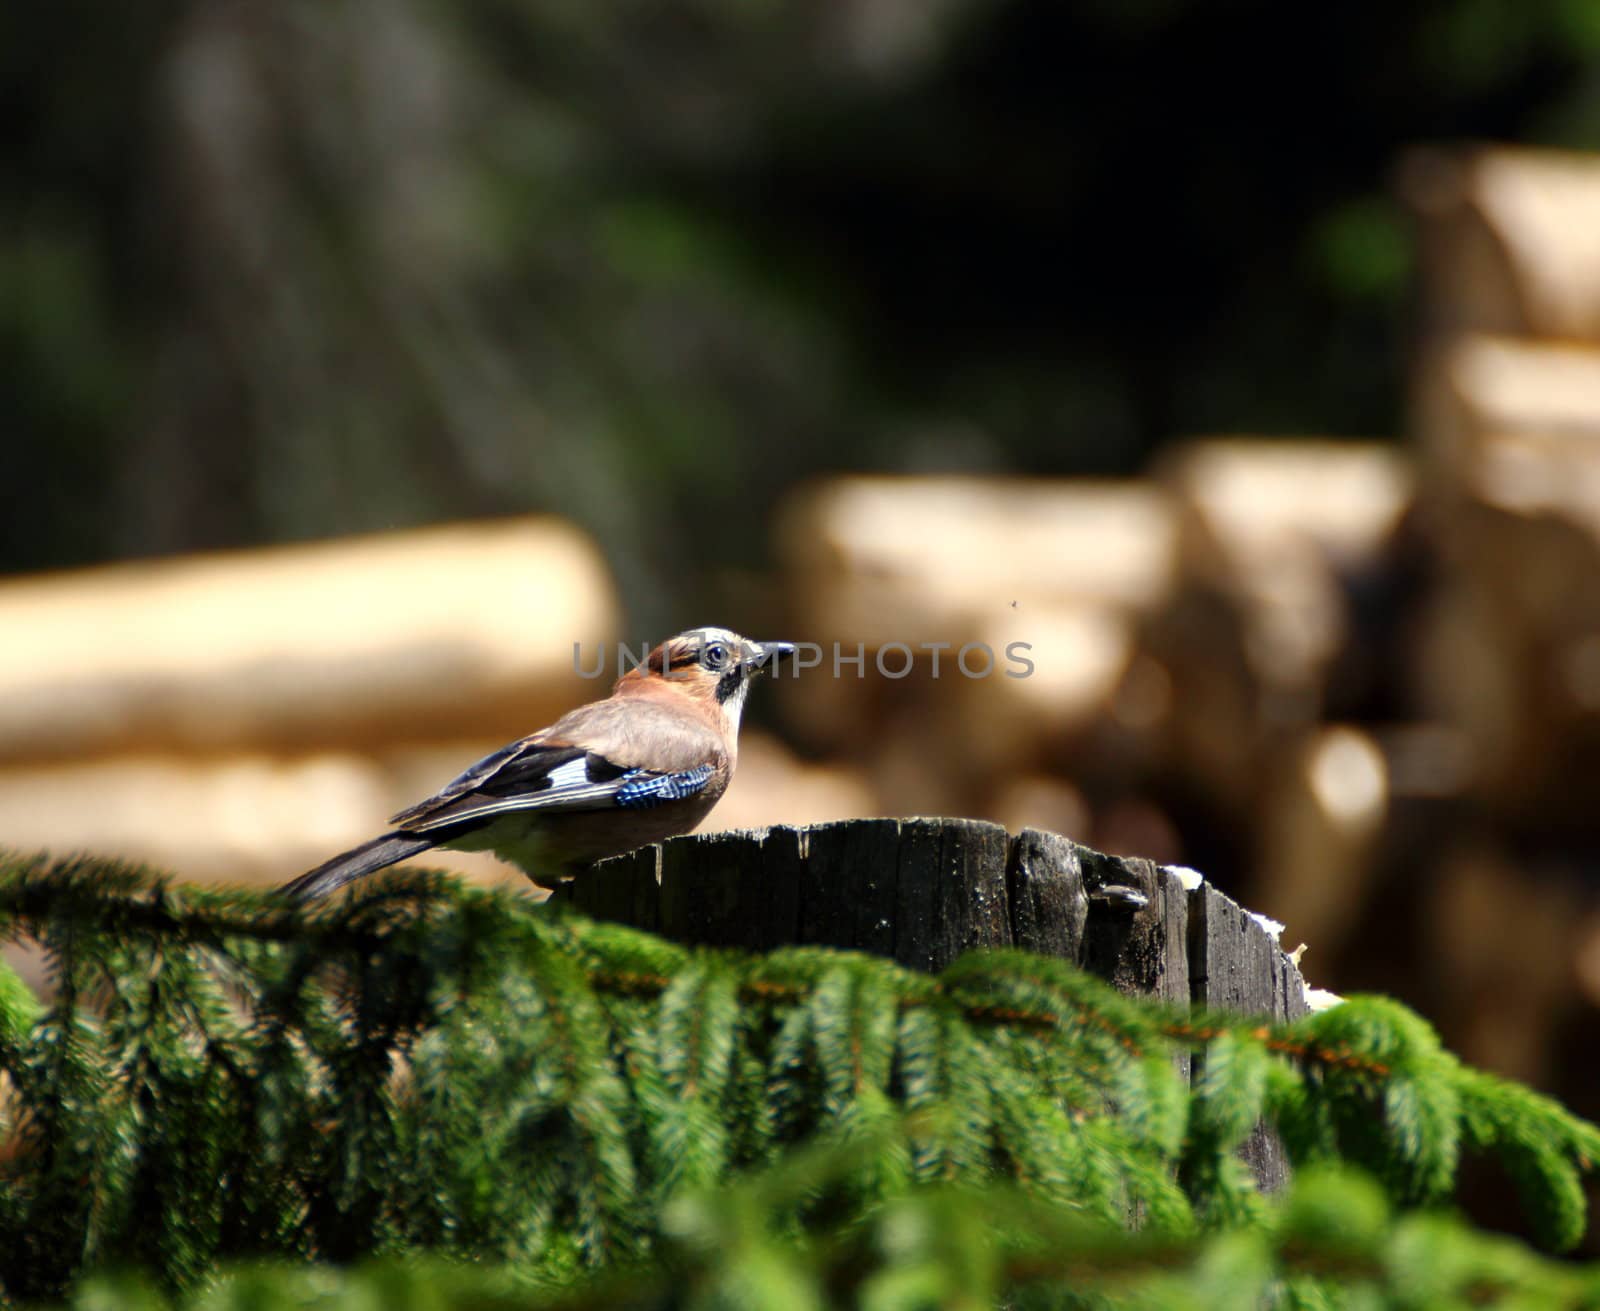 jay searching for food by taviphoto